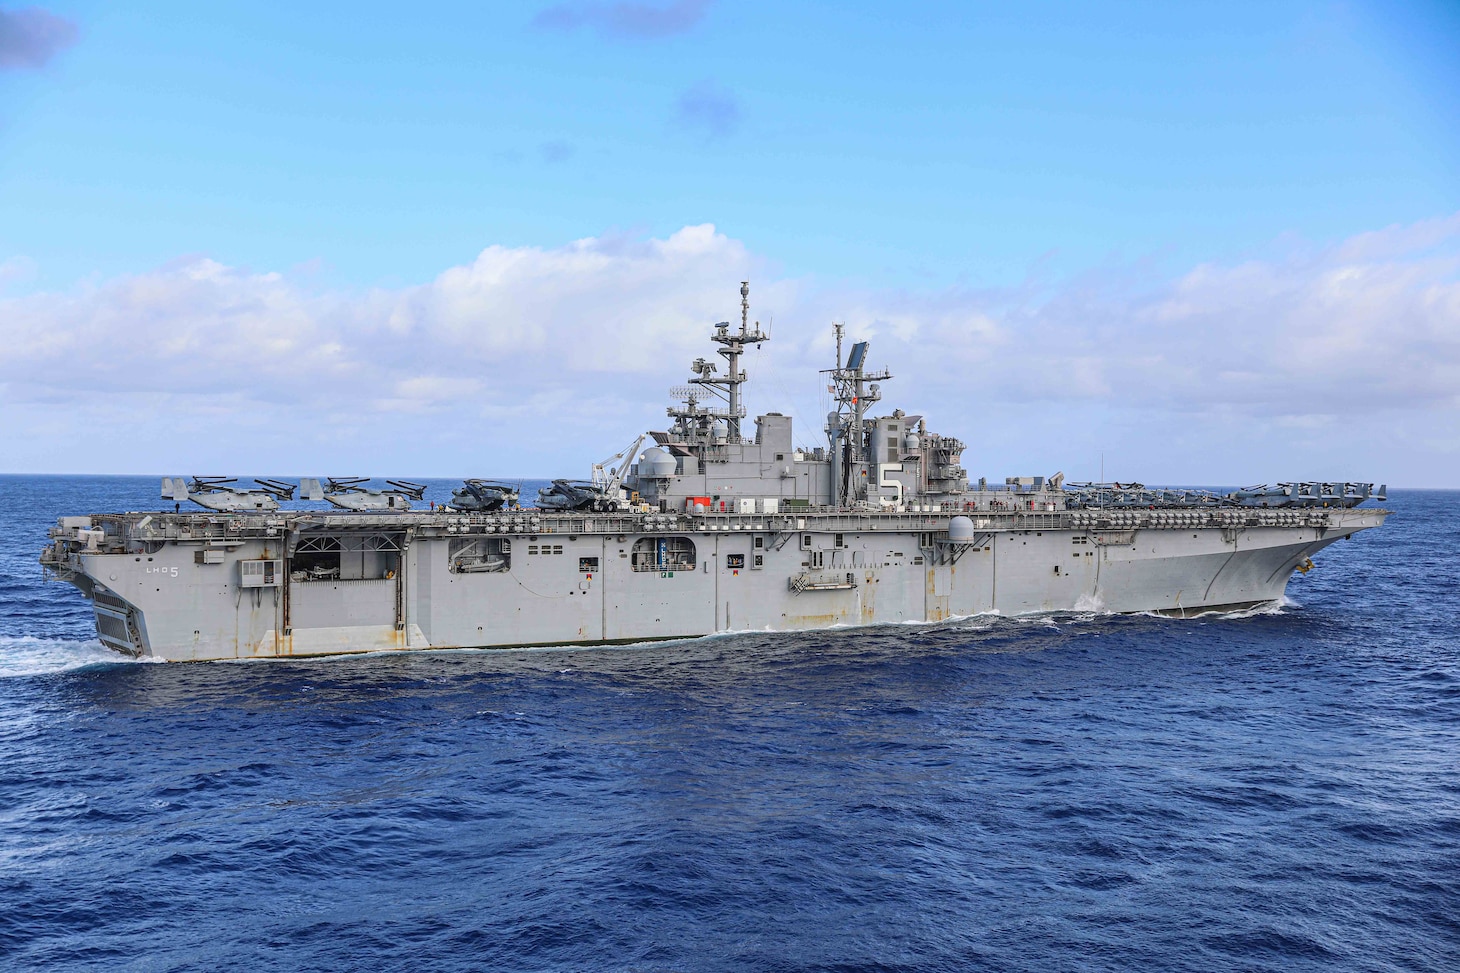 The Wasp-class amphibious assault ship USS Bataan (LHD 5) transits the Atlantic Ocean during the Carrier Strike Group Four Composite Training Unit Exercise (COMPTUEX).